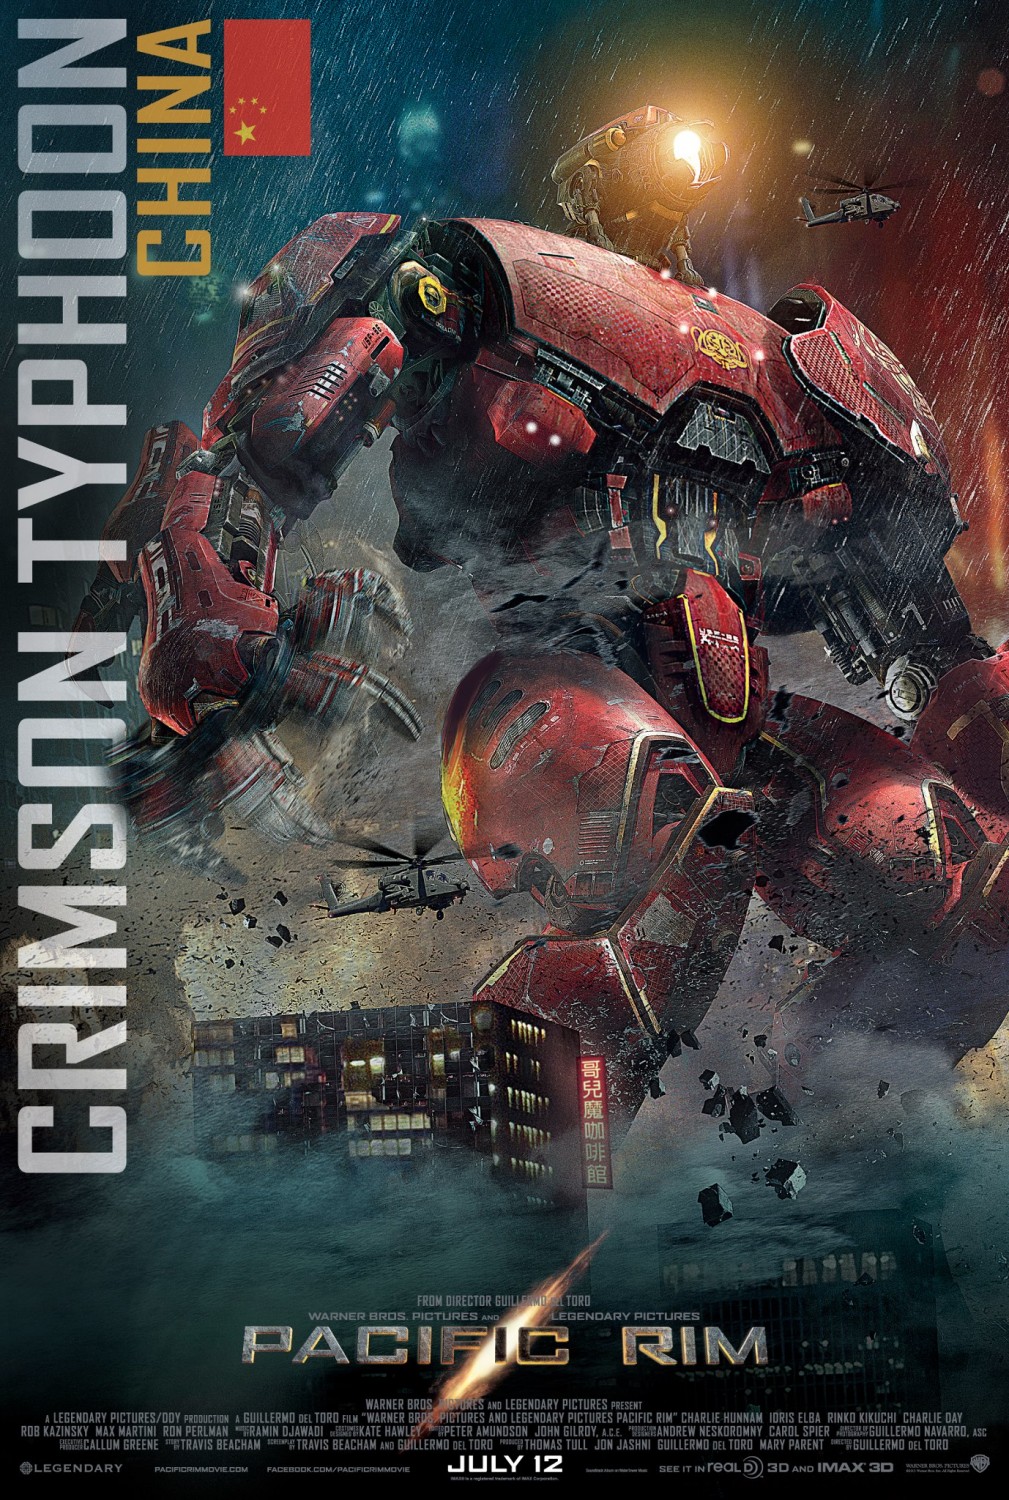 The Geeky Nerfherder: Movie Poster Art: 'Pacific Rim' (2013)